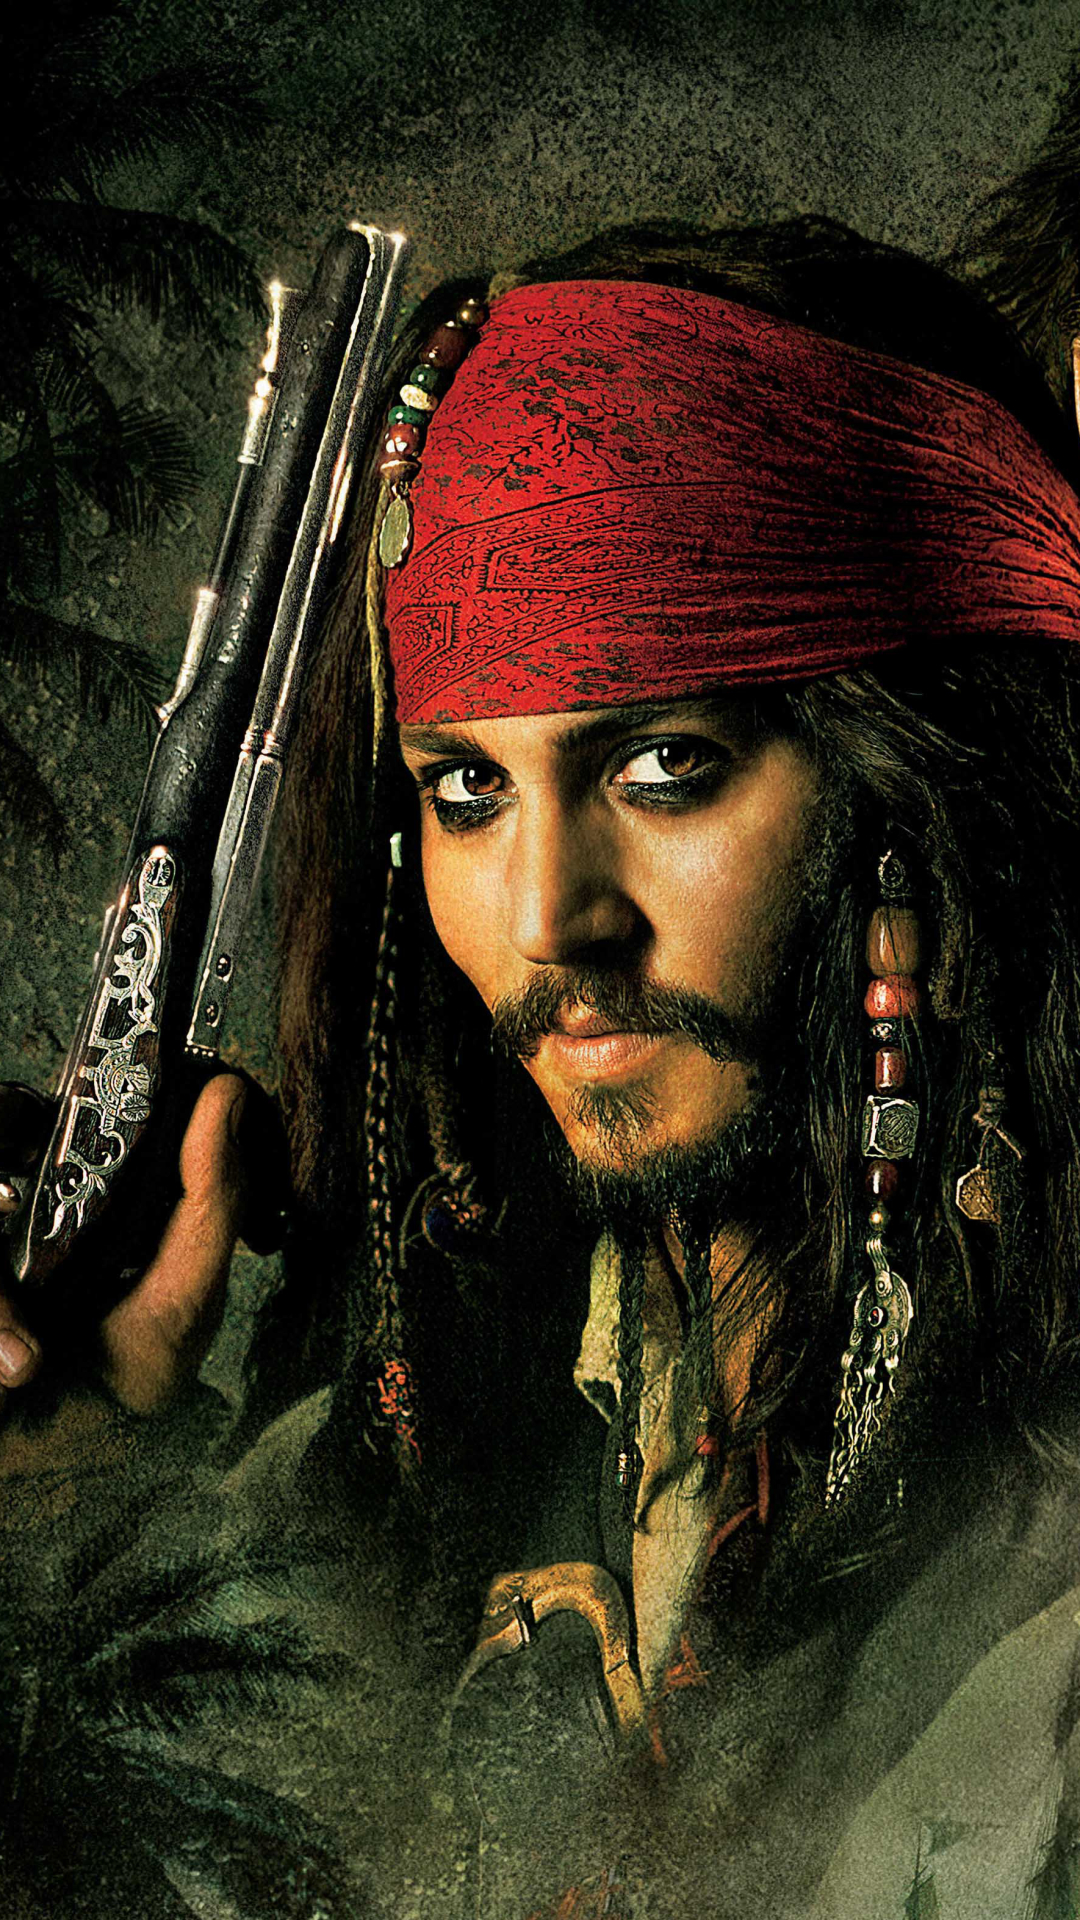 jack sparrow, pirates of the caribbean, johnny depp, movie, pirates of the caribbean: dead man's chest HD wallpaper